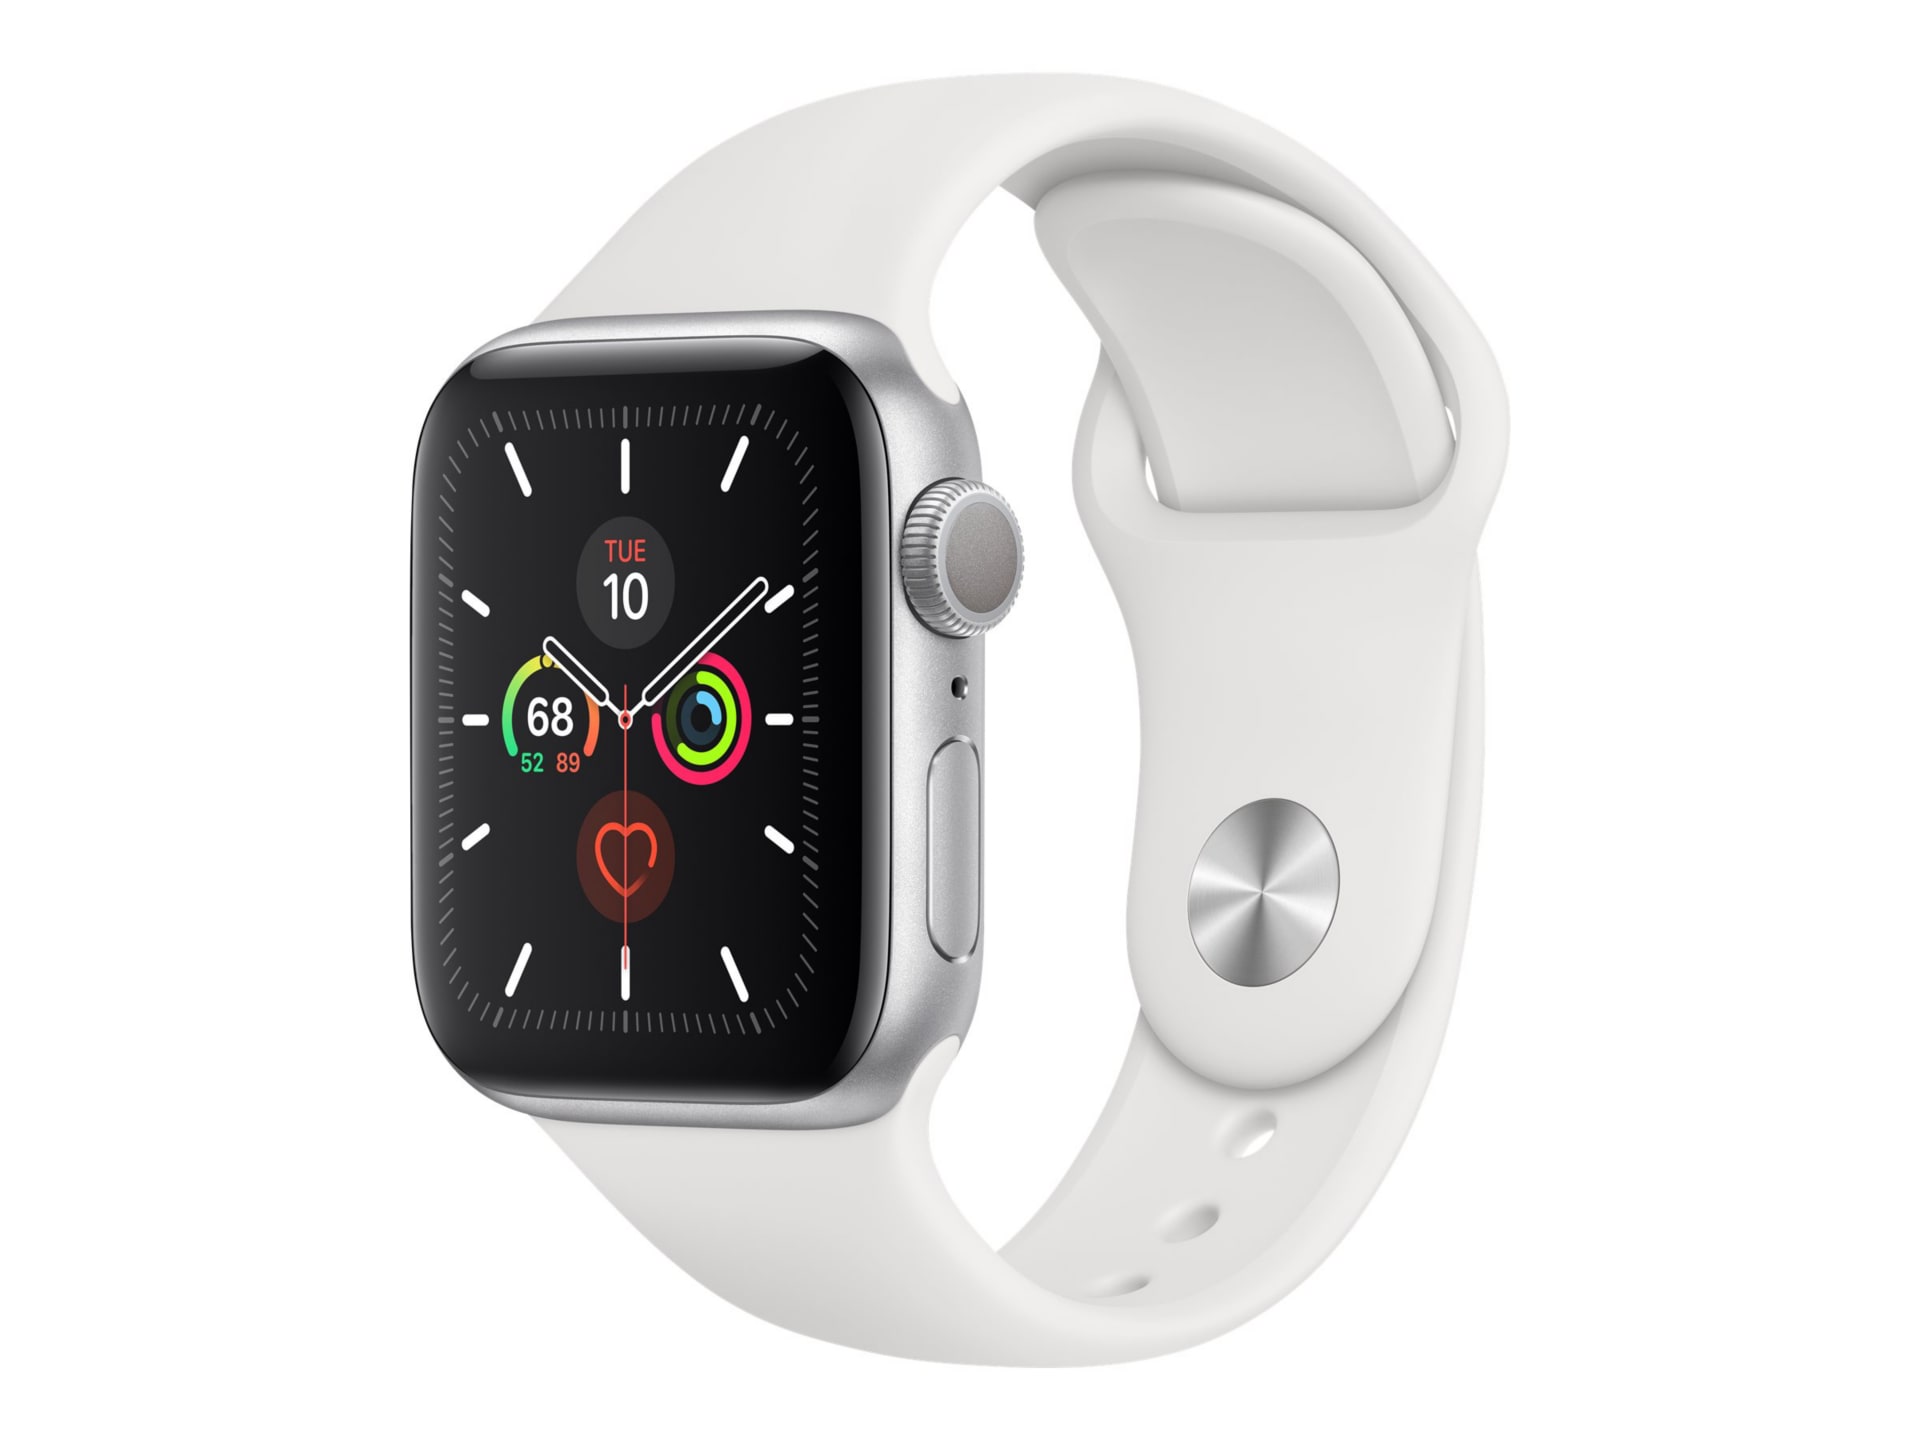 Apple Watch Series 5 (GPS + Cellular) - silver aluminum - smart watch with